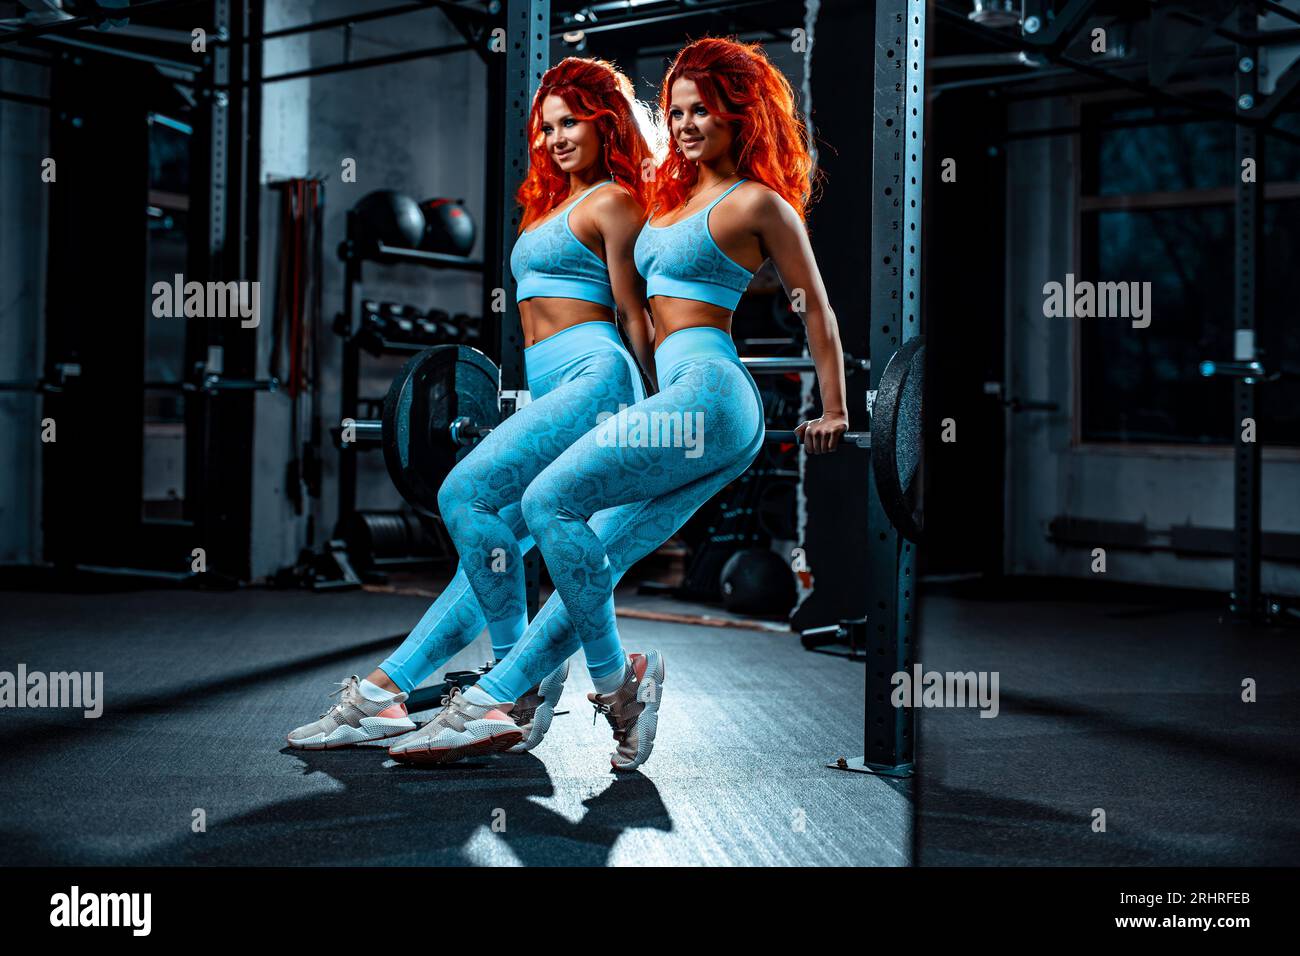 Young sports twins girls team posing in gym Stock Photo